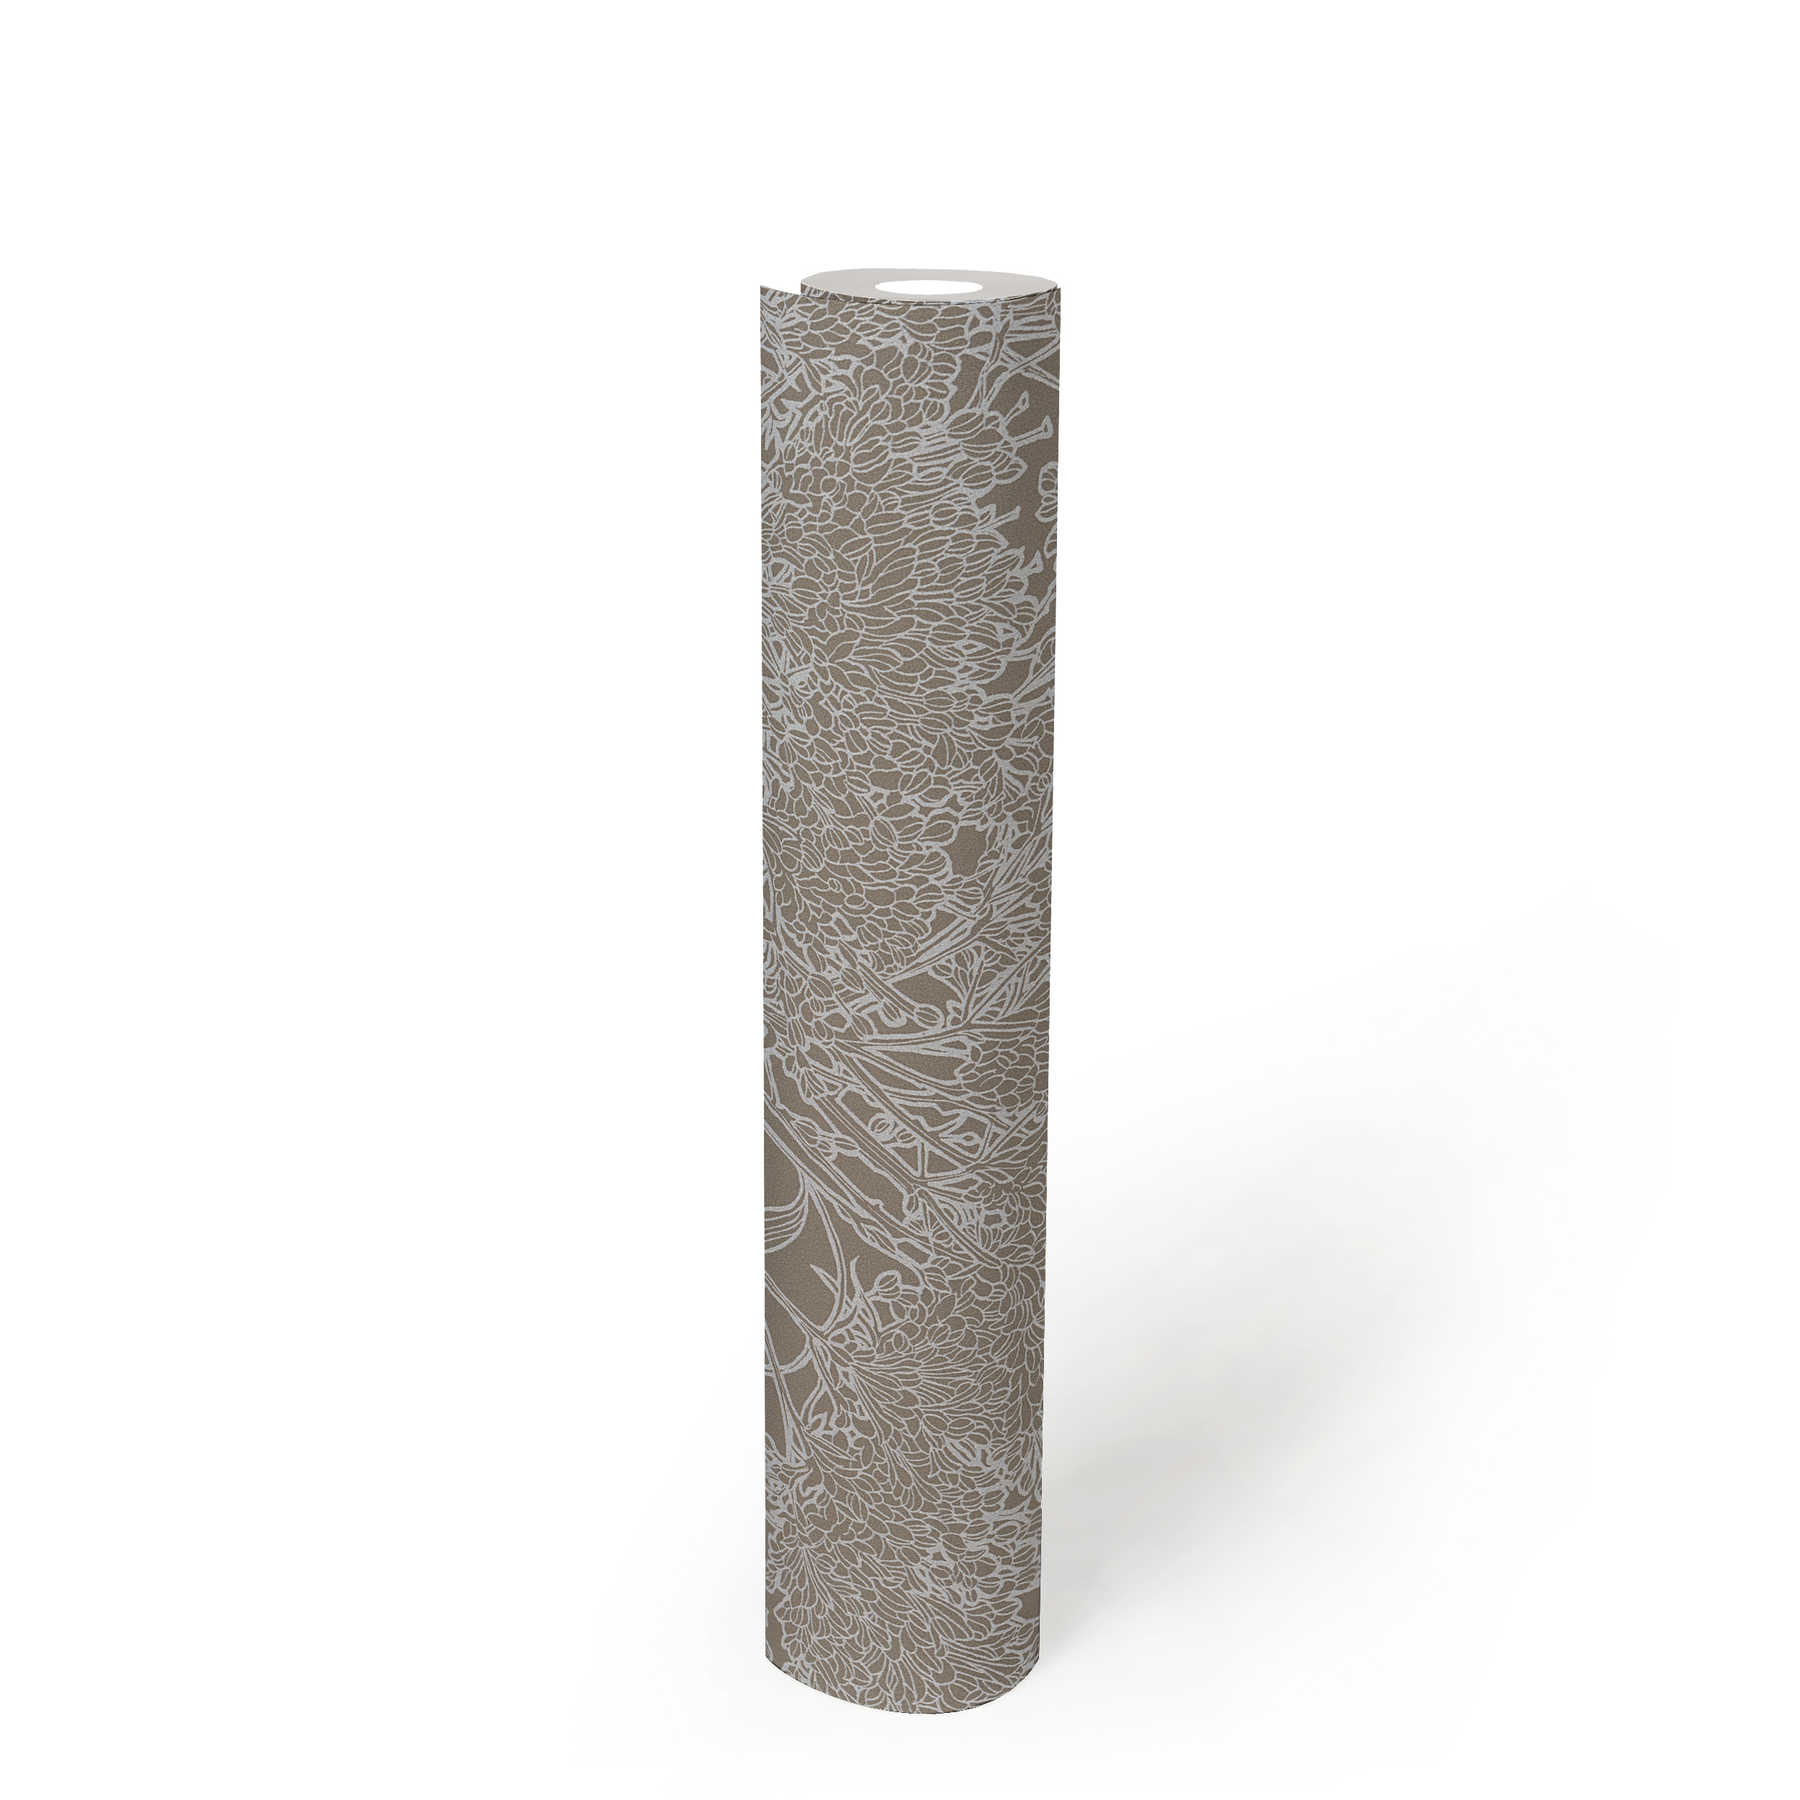             Floral wallpaper in grey with silver metallic effect - grey, silver
        